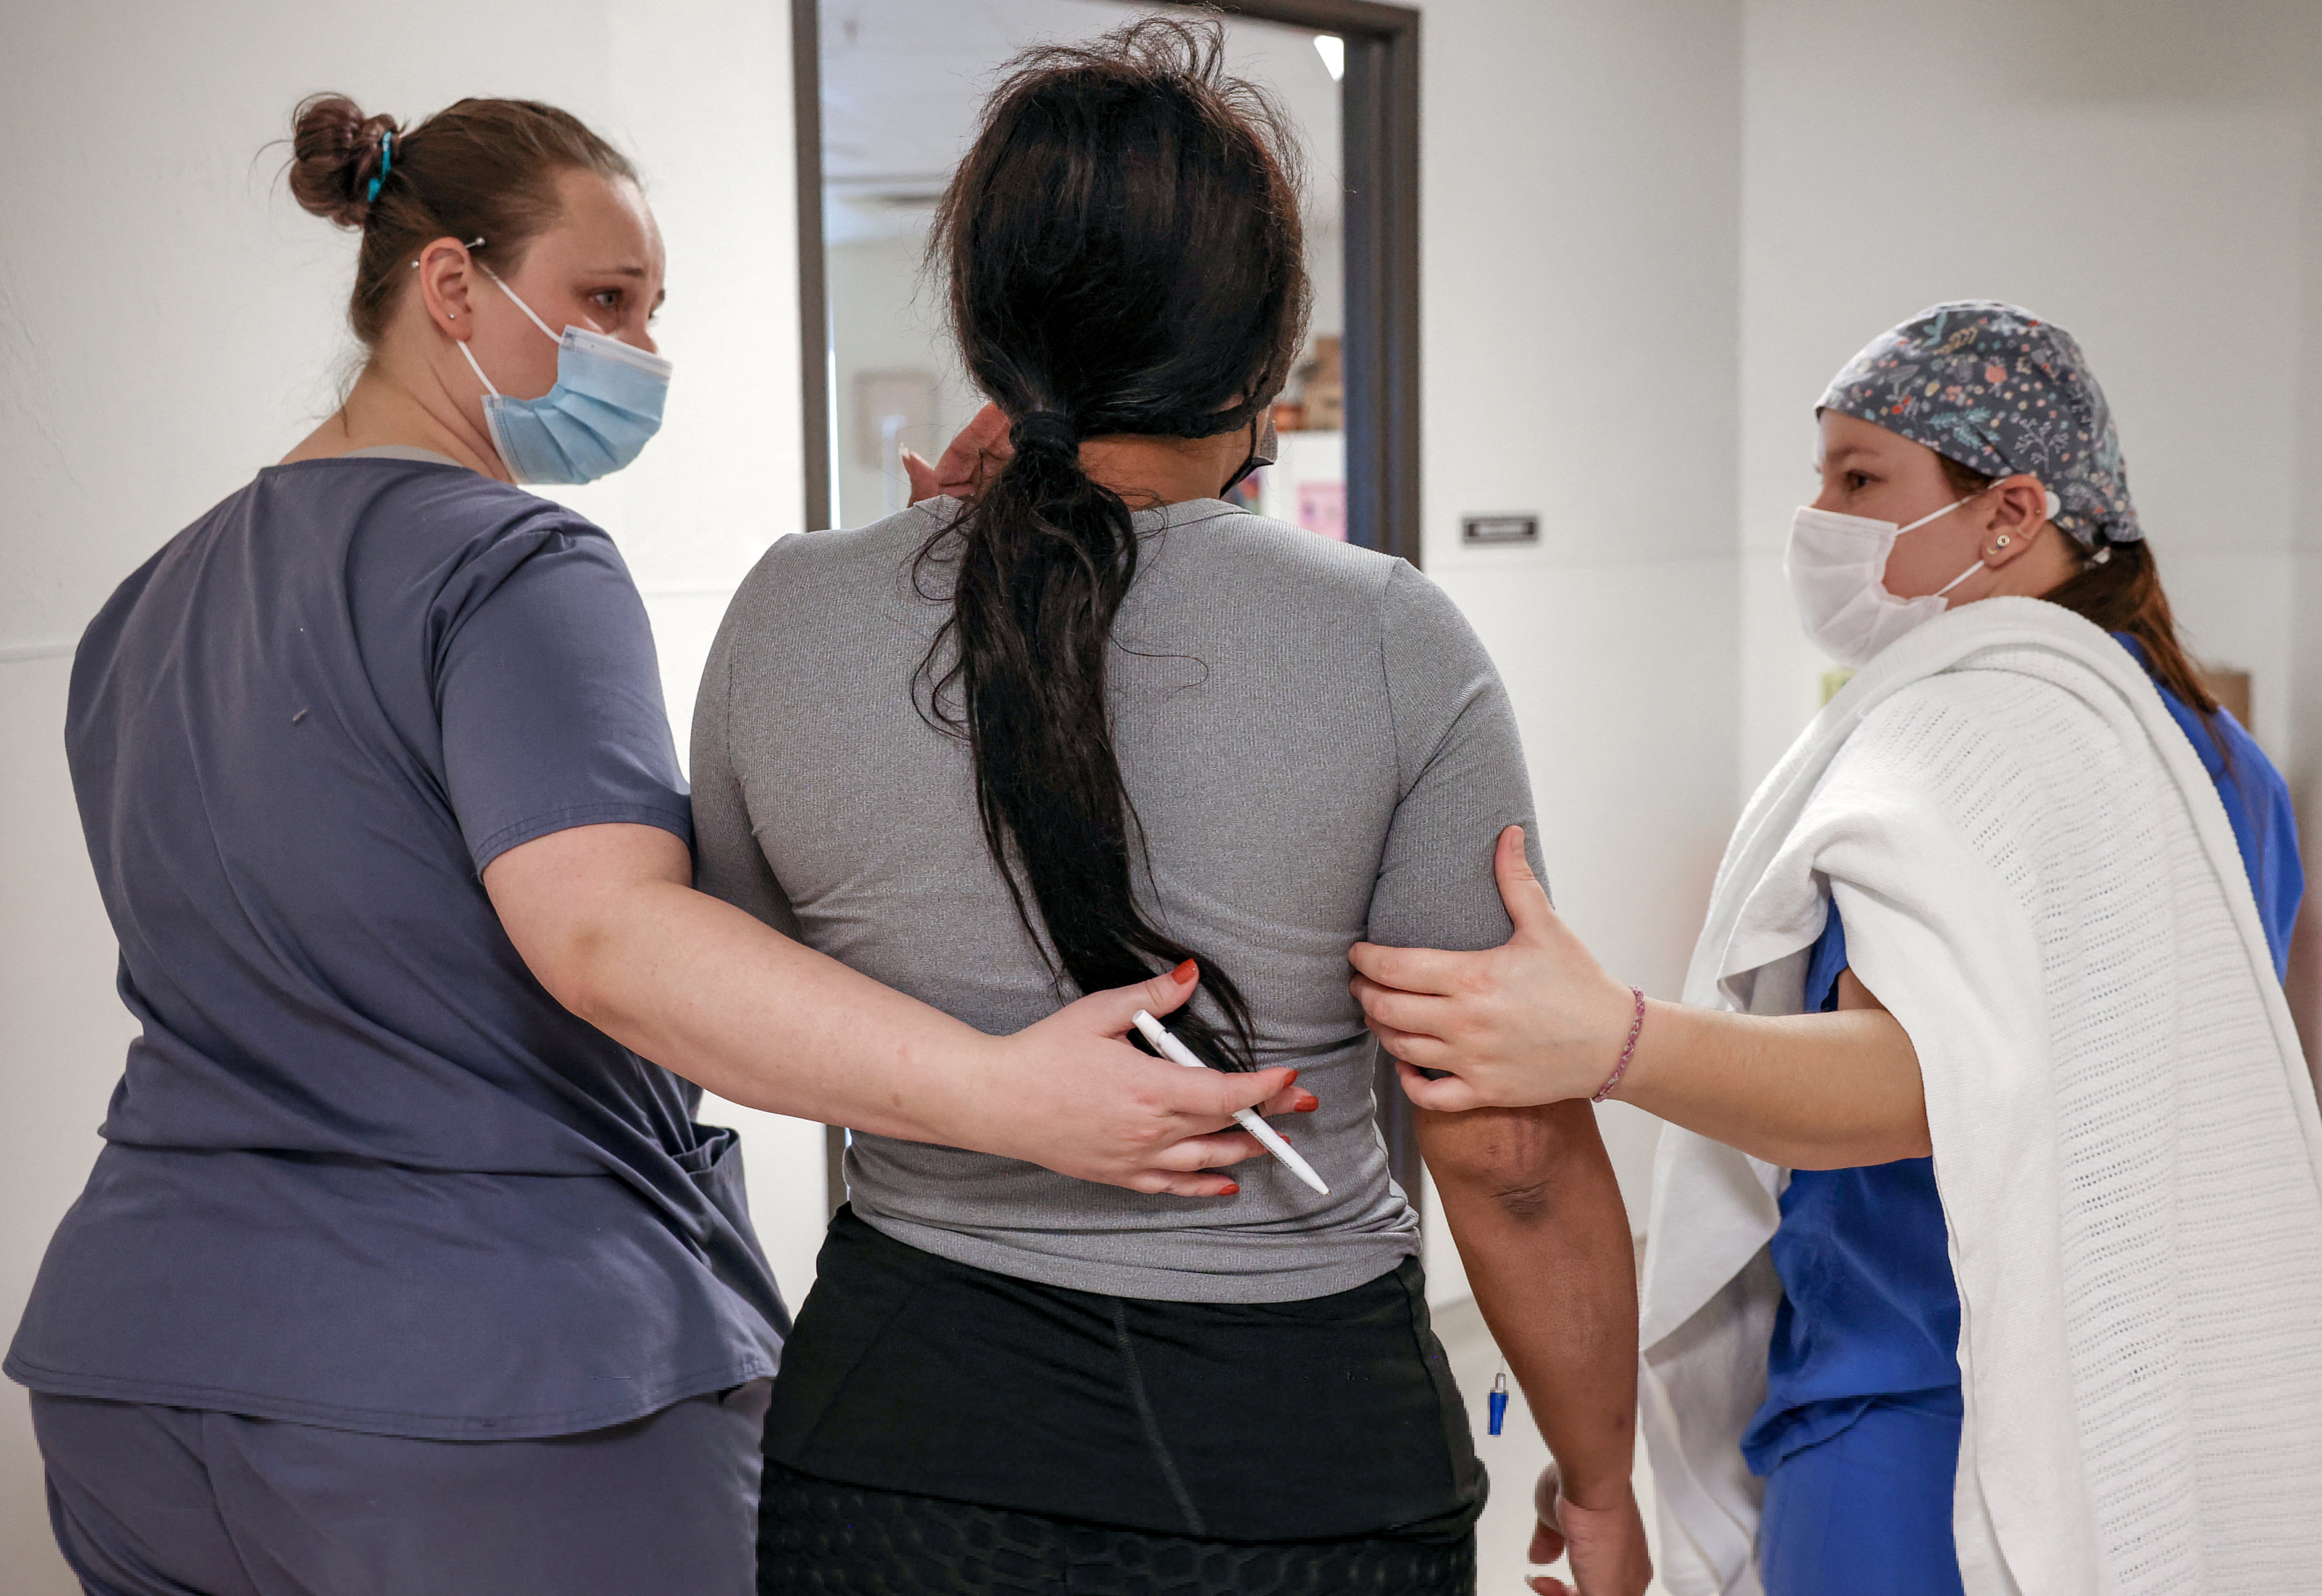 Surgical tech Carissa and recovery room staff member Elise walk a Texan patient to the recovery room following her abortion at the Trust Women clinic in Oklahoma City